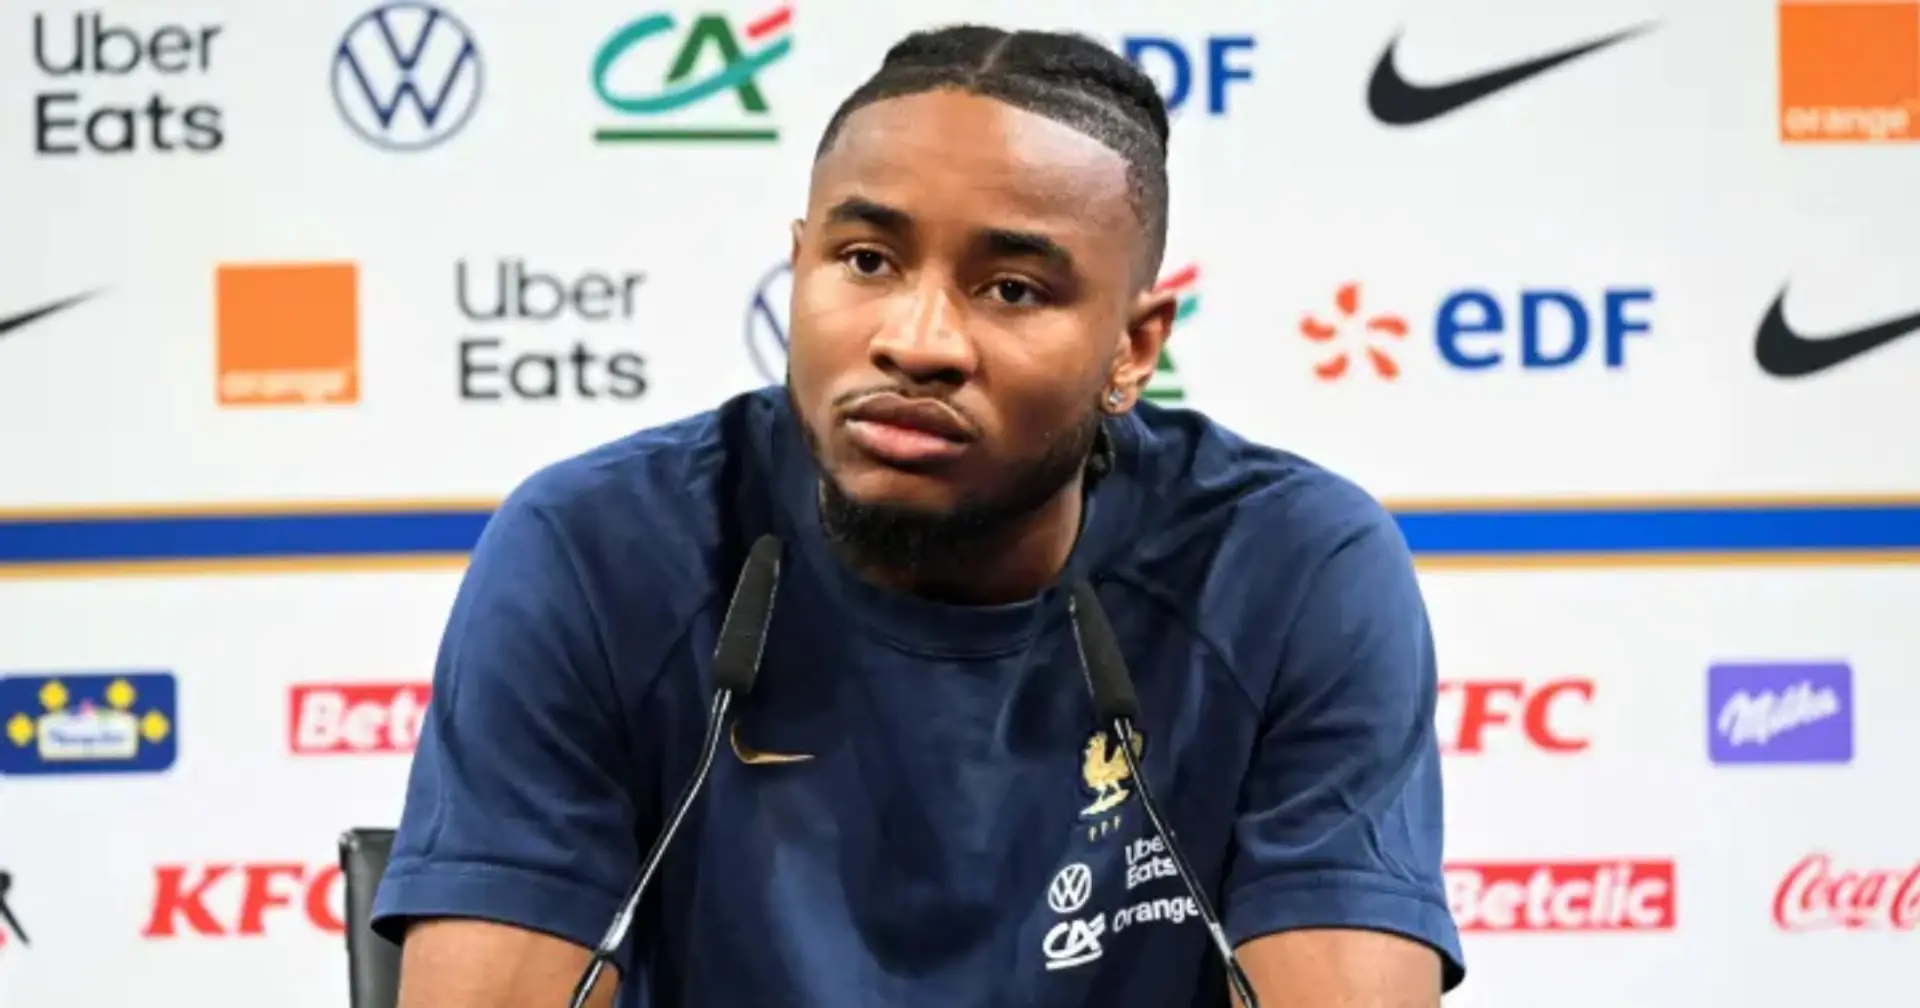 'I'm looking forward to showing the fans what I can do on': Christopher Nkunku's first words as a Chelsea player